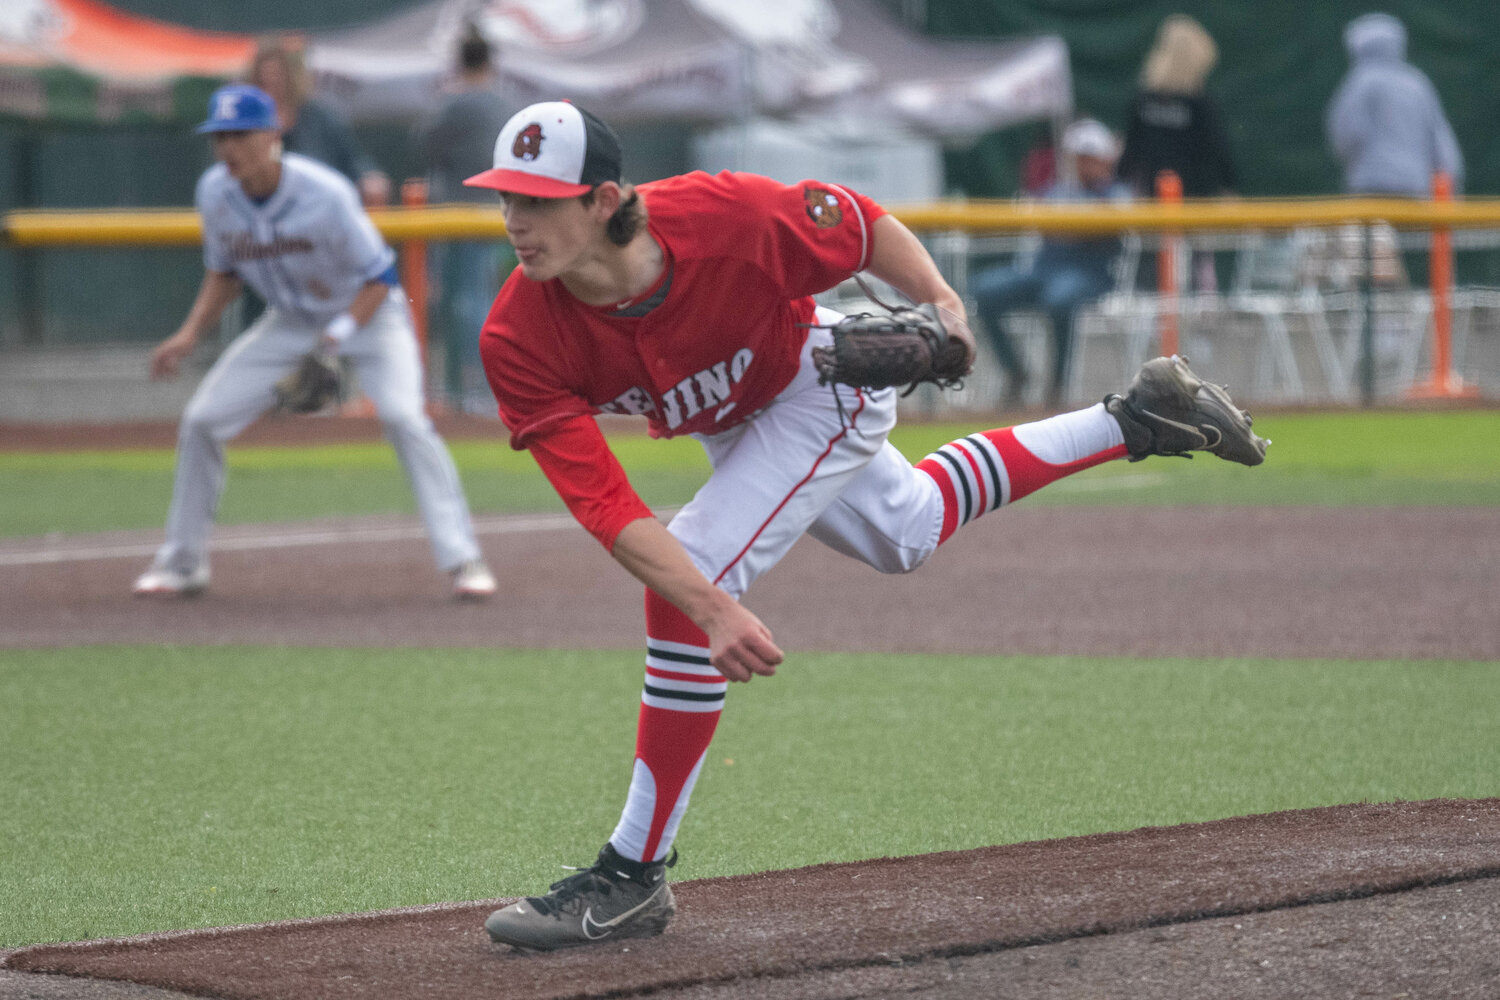 Tenino's Brody Noonan follows through on a pitch during the 45th annual Southwest Washington Senior All-Star Game, May 31 at Story Field in Longview.